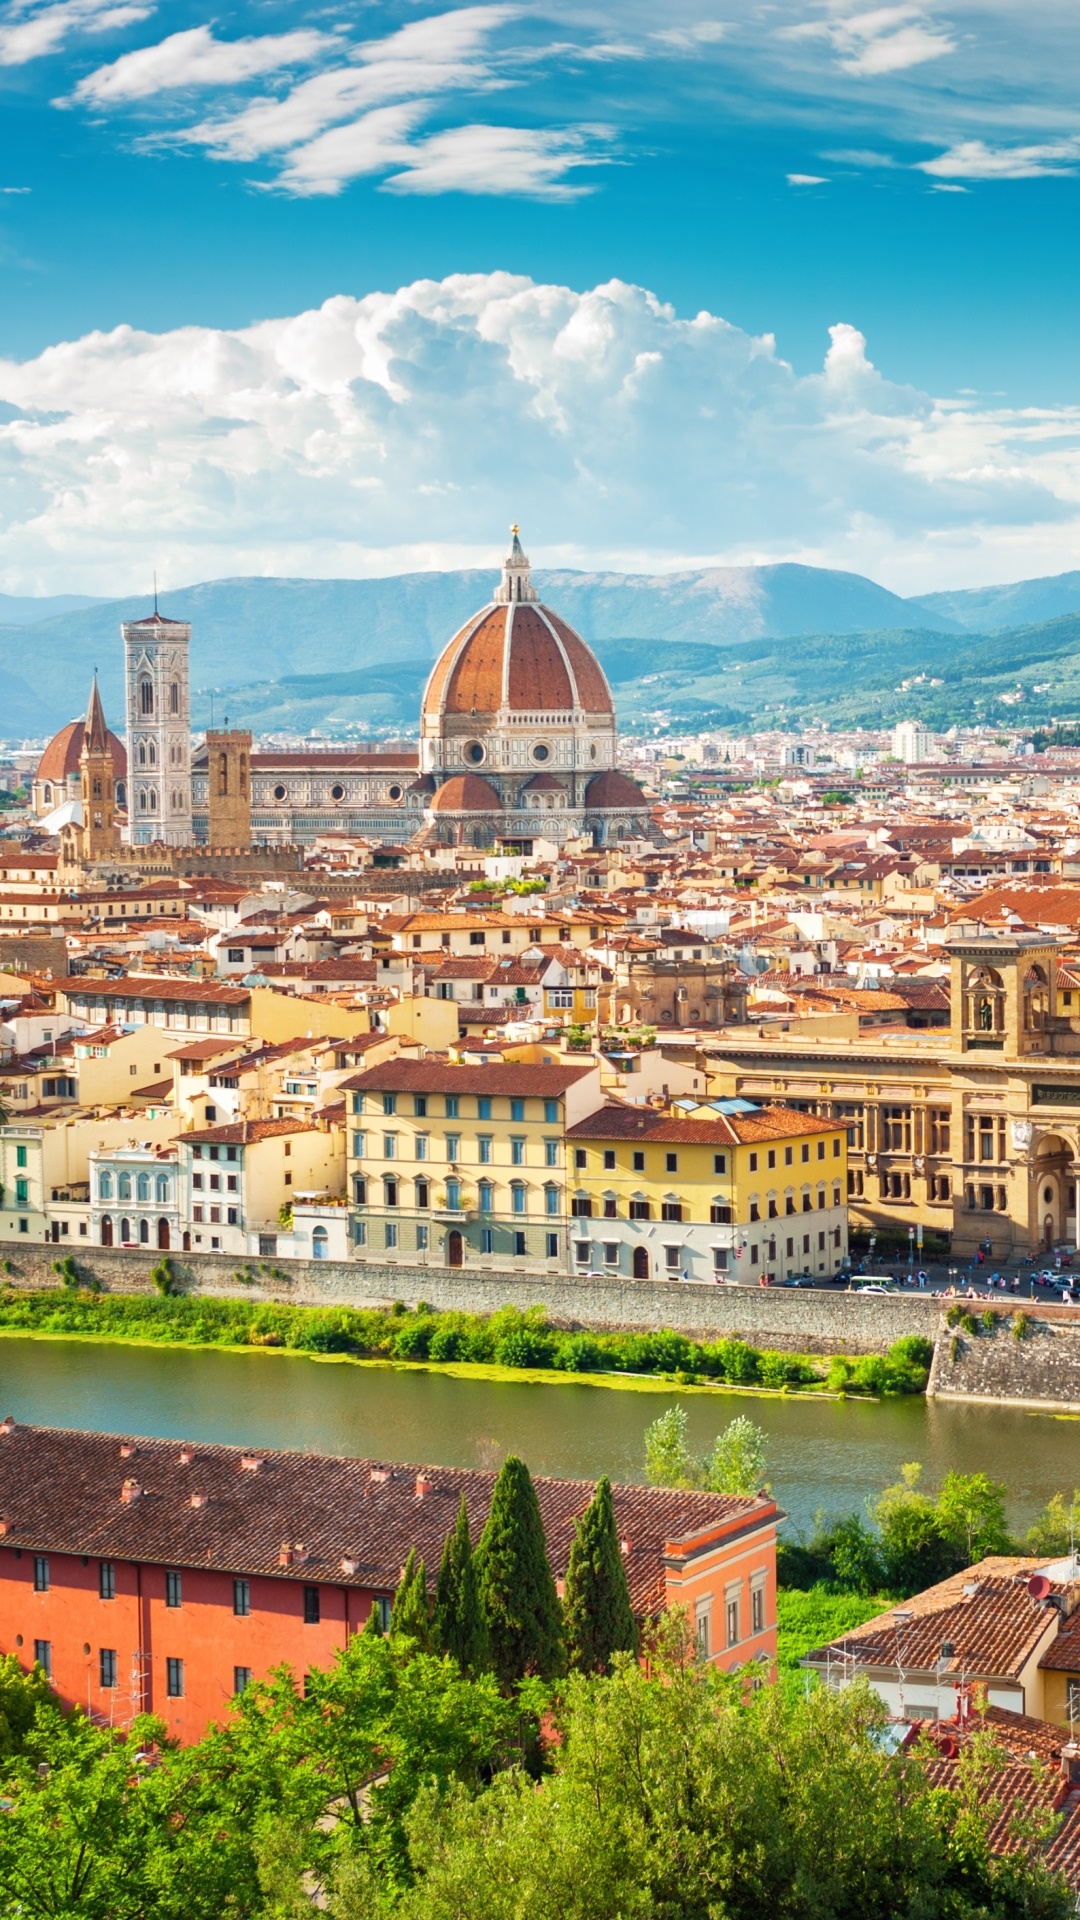 Wallpaper / Man Made Florence Phone Wallpaper, Cityscape, Italy, City, Building, Cathedral, 1080x1920 free download